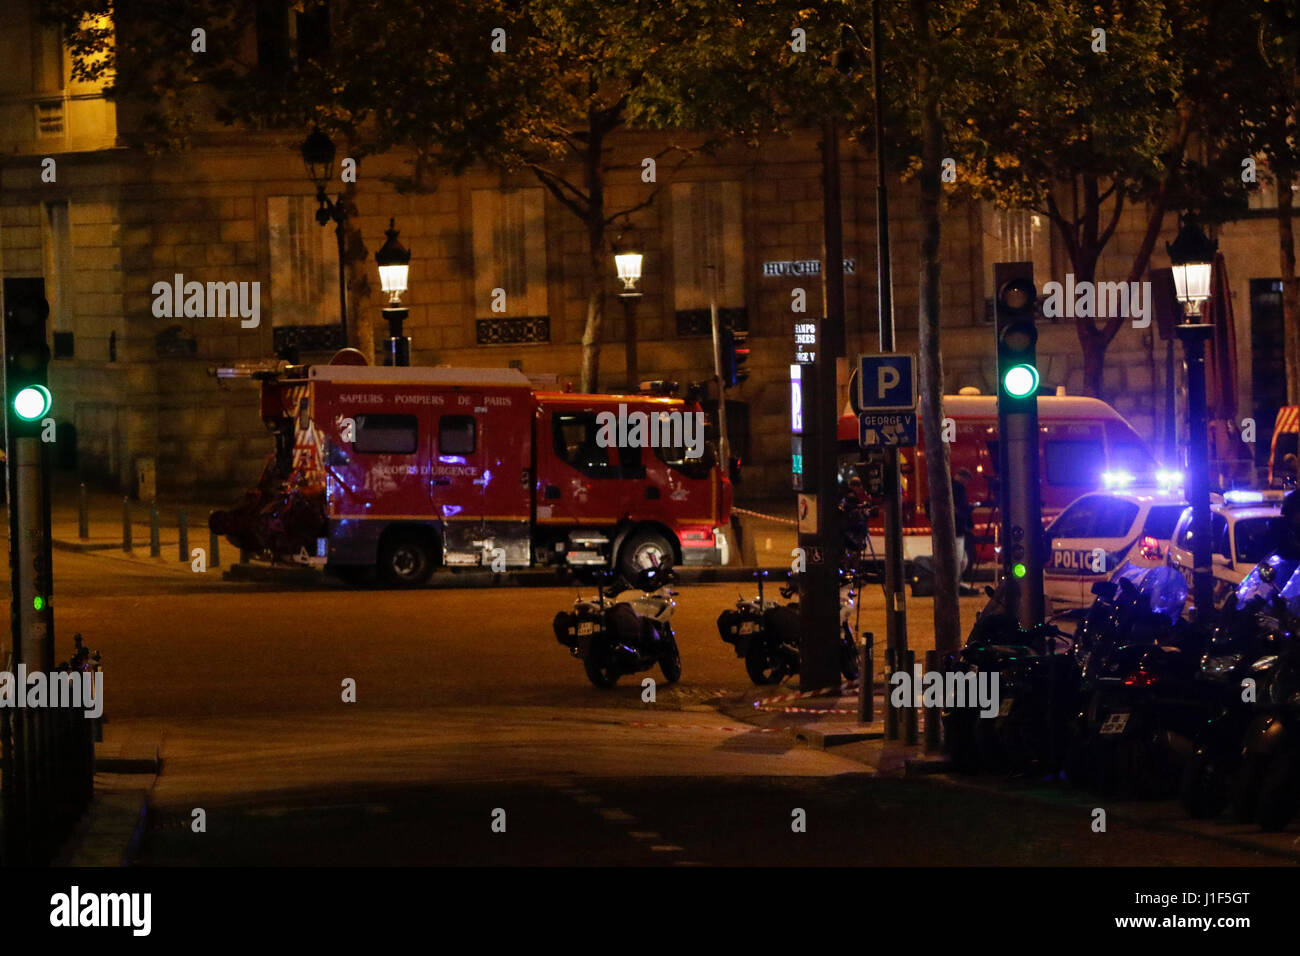 Paris, France. 20th Apr, 2017. Communication and control vehicles from the Paris Fire brigade are parked in the Champs-Elysees. The Champs-Elysées avenue in Paris has been closed off by Police after an terror attack that cost the life of one Police officer. Credit: Michael Debets/Pacific Press/Alamy Live News Stock Photo